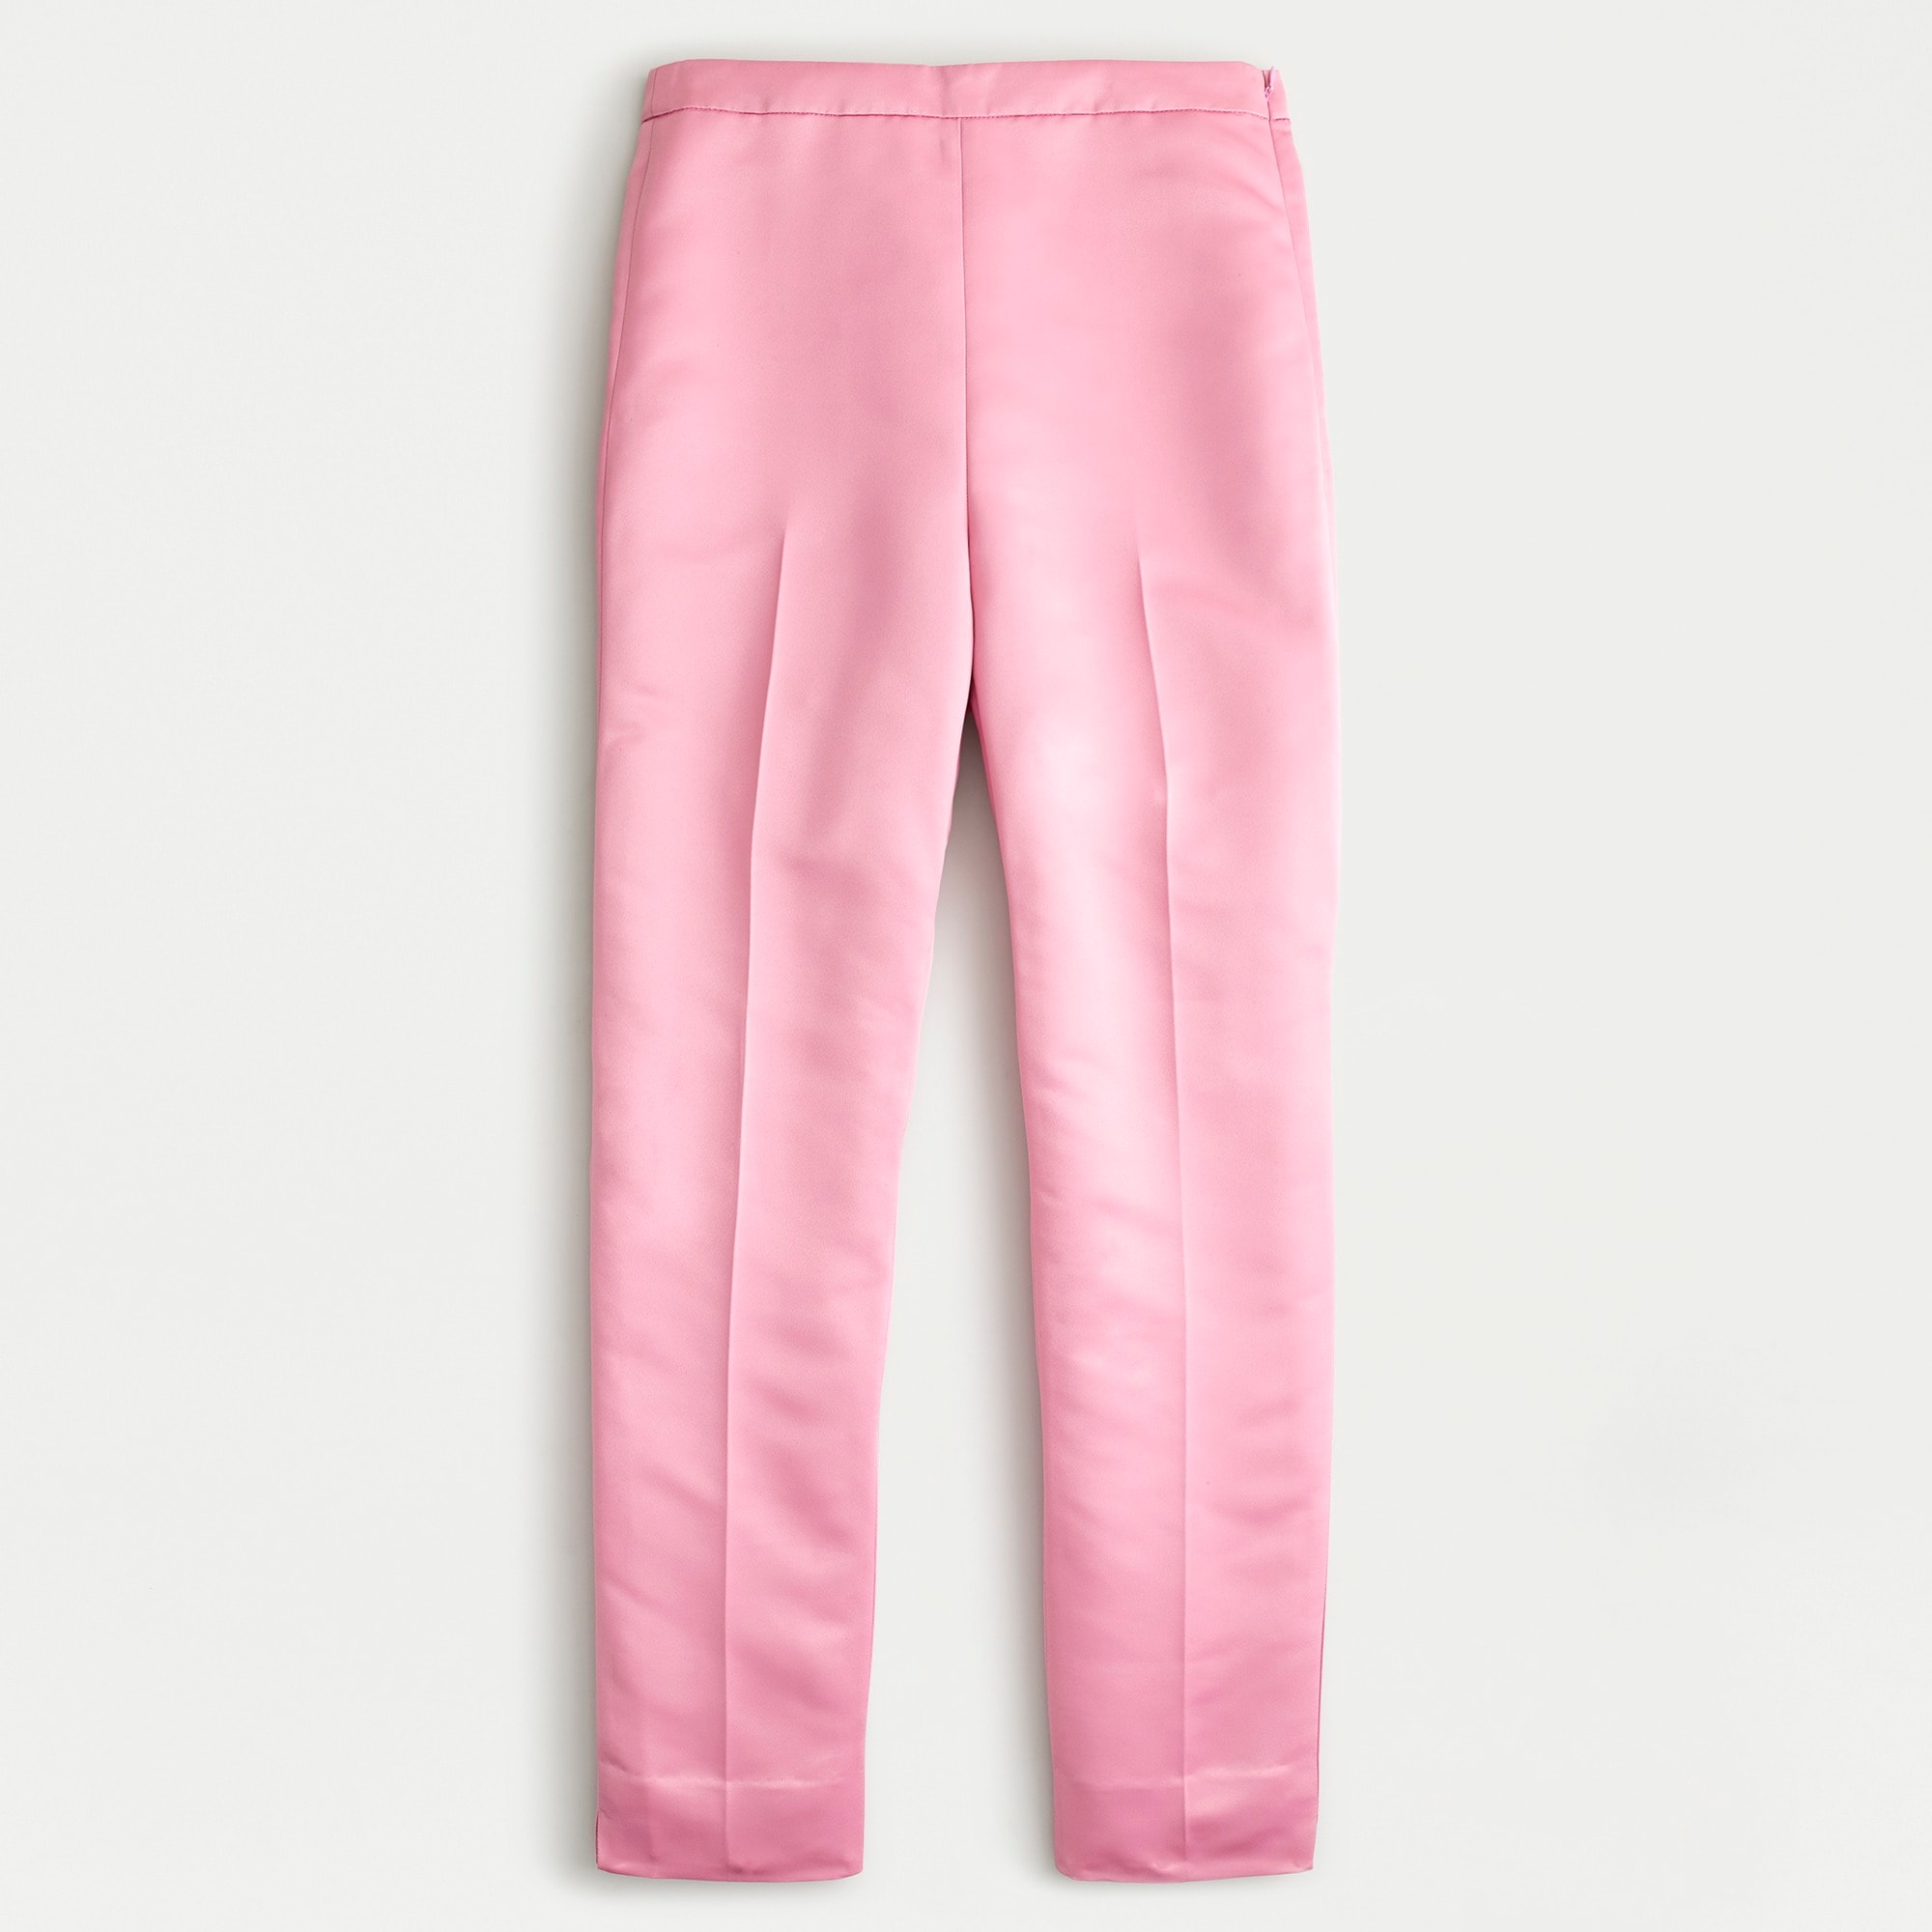 In Pant Cigarette J.Crew: For High-rise Women Satin